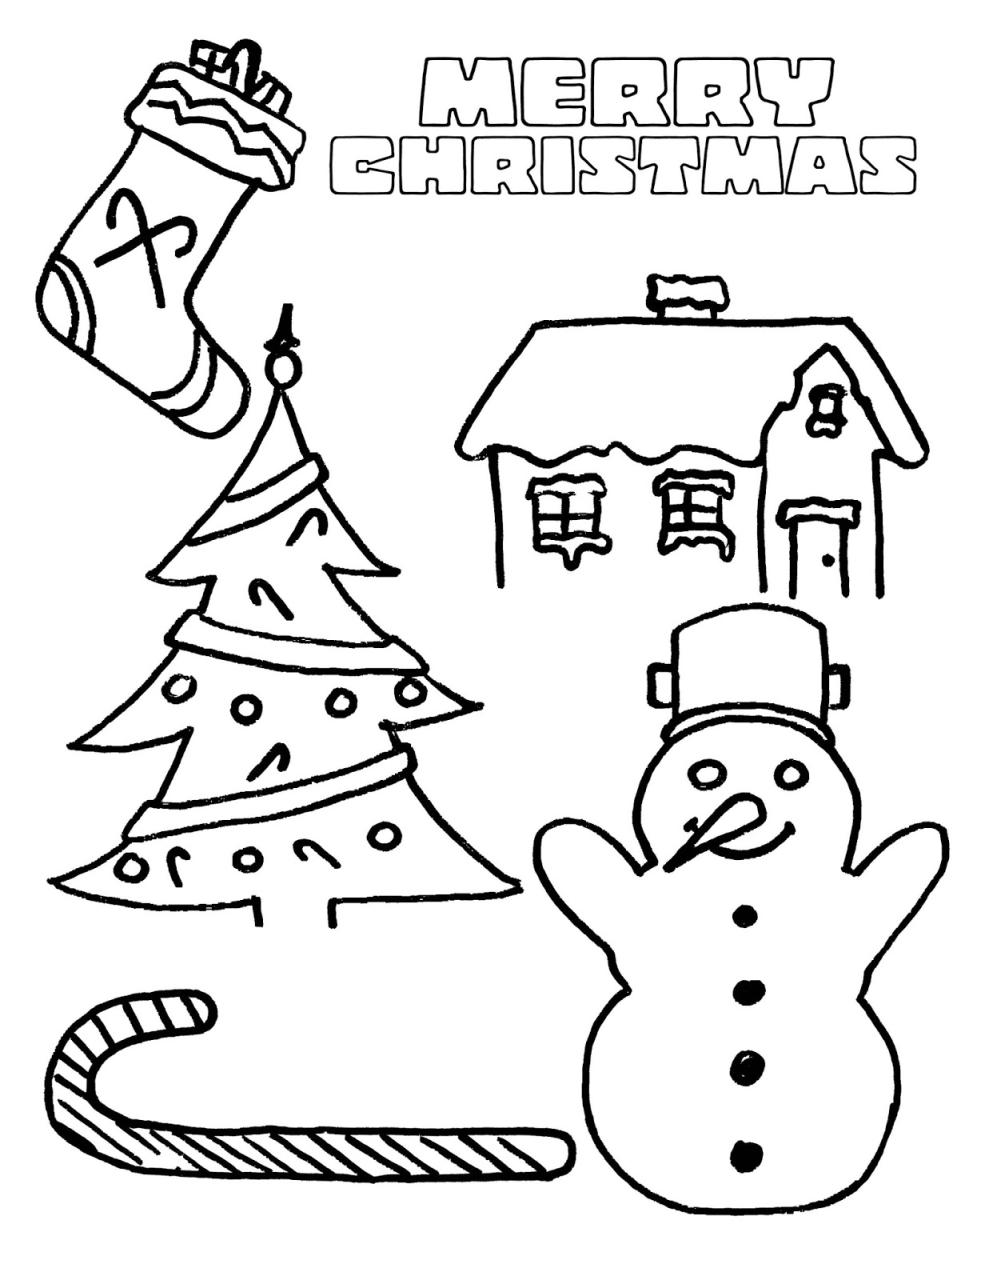 Coloring Pages Christmas Snowman Coloring Pages Free and Printable